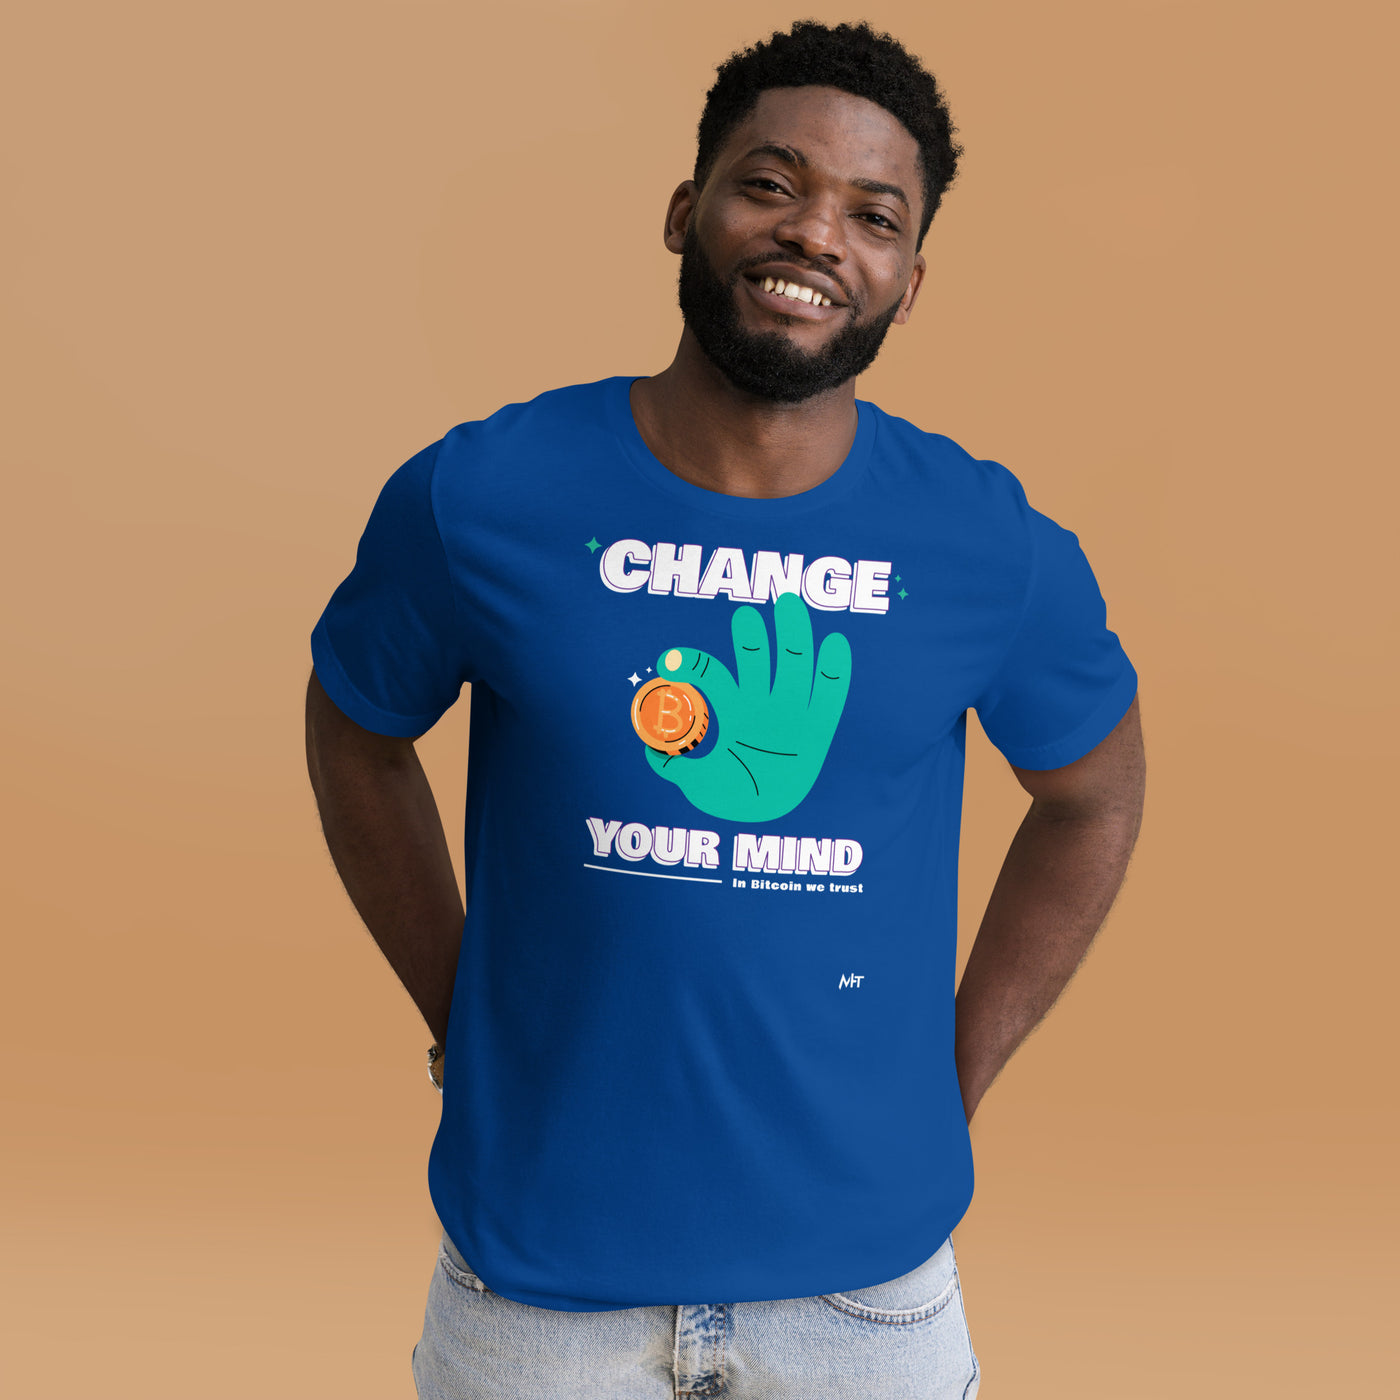 Change your mind in Bitcoin we Trust - Unisex t-shirt